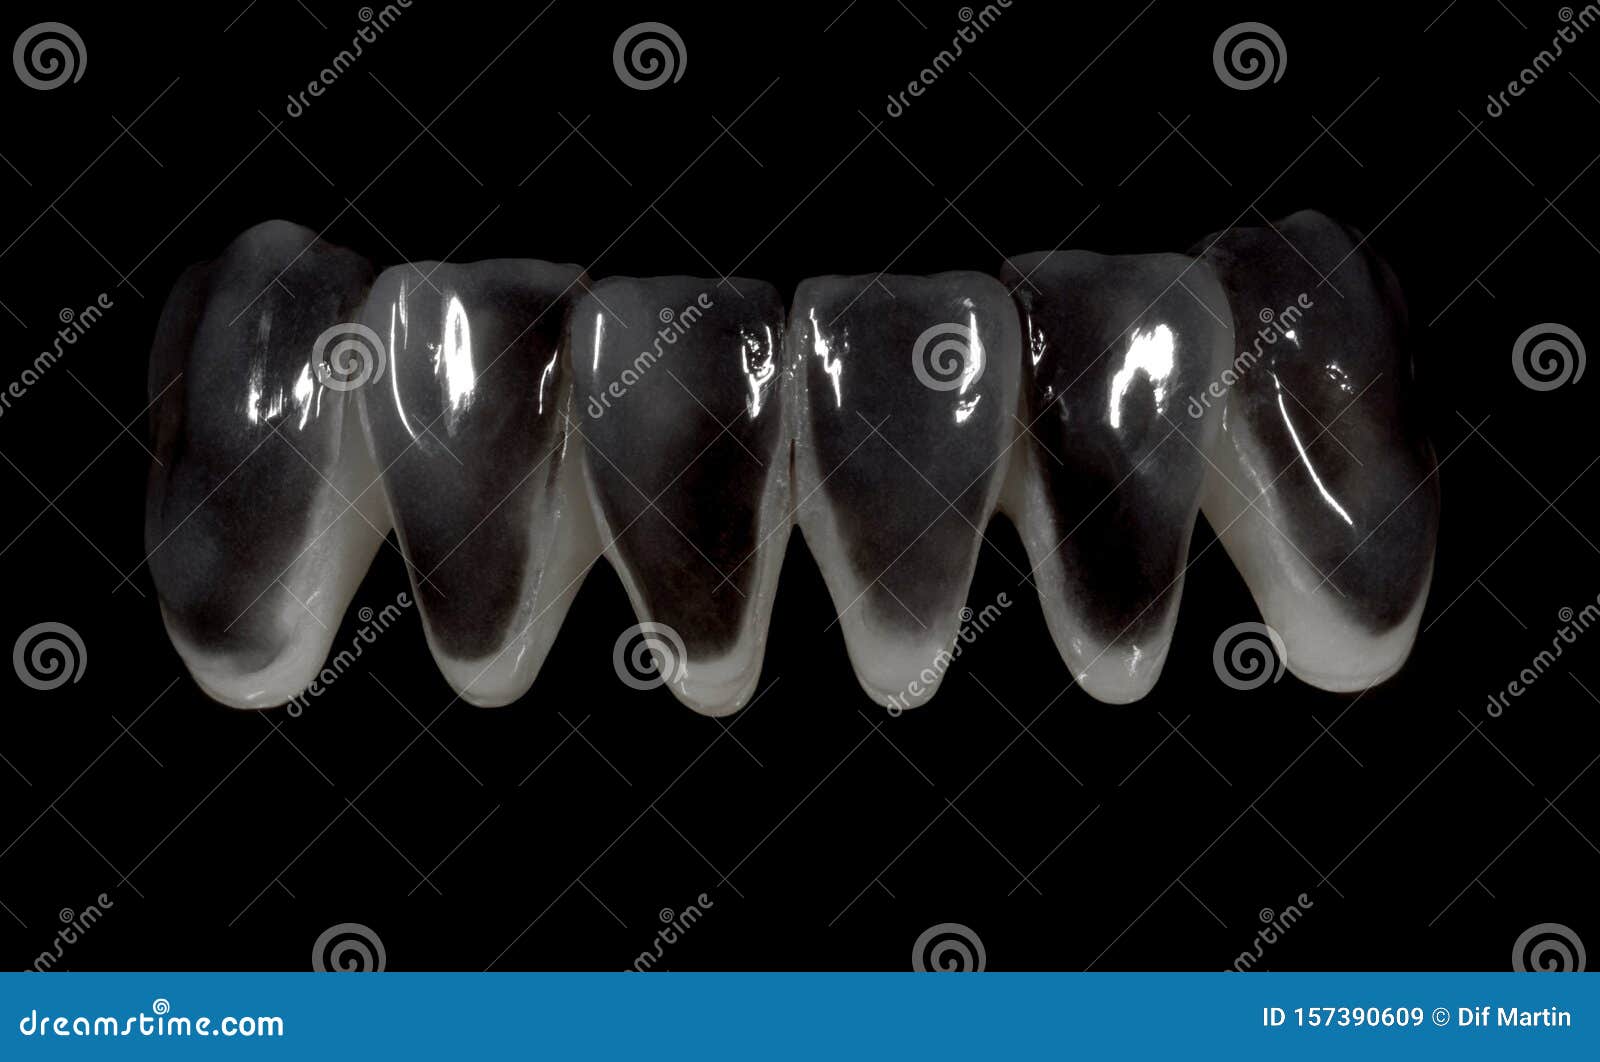 1 241 Art Dental Photos Free Royalty Free Stock Photos From Dreamstime